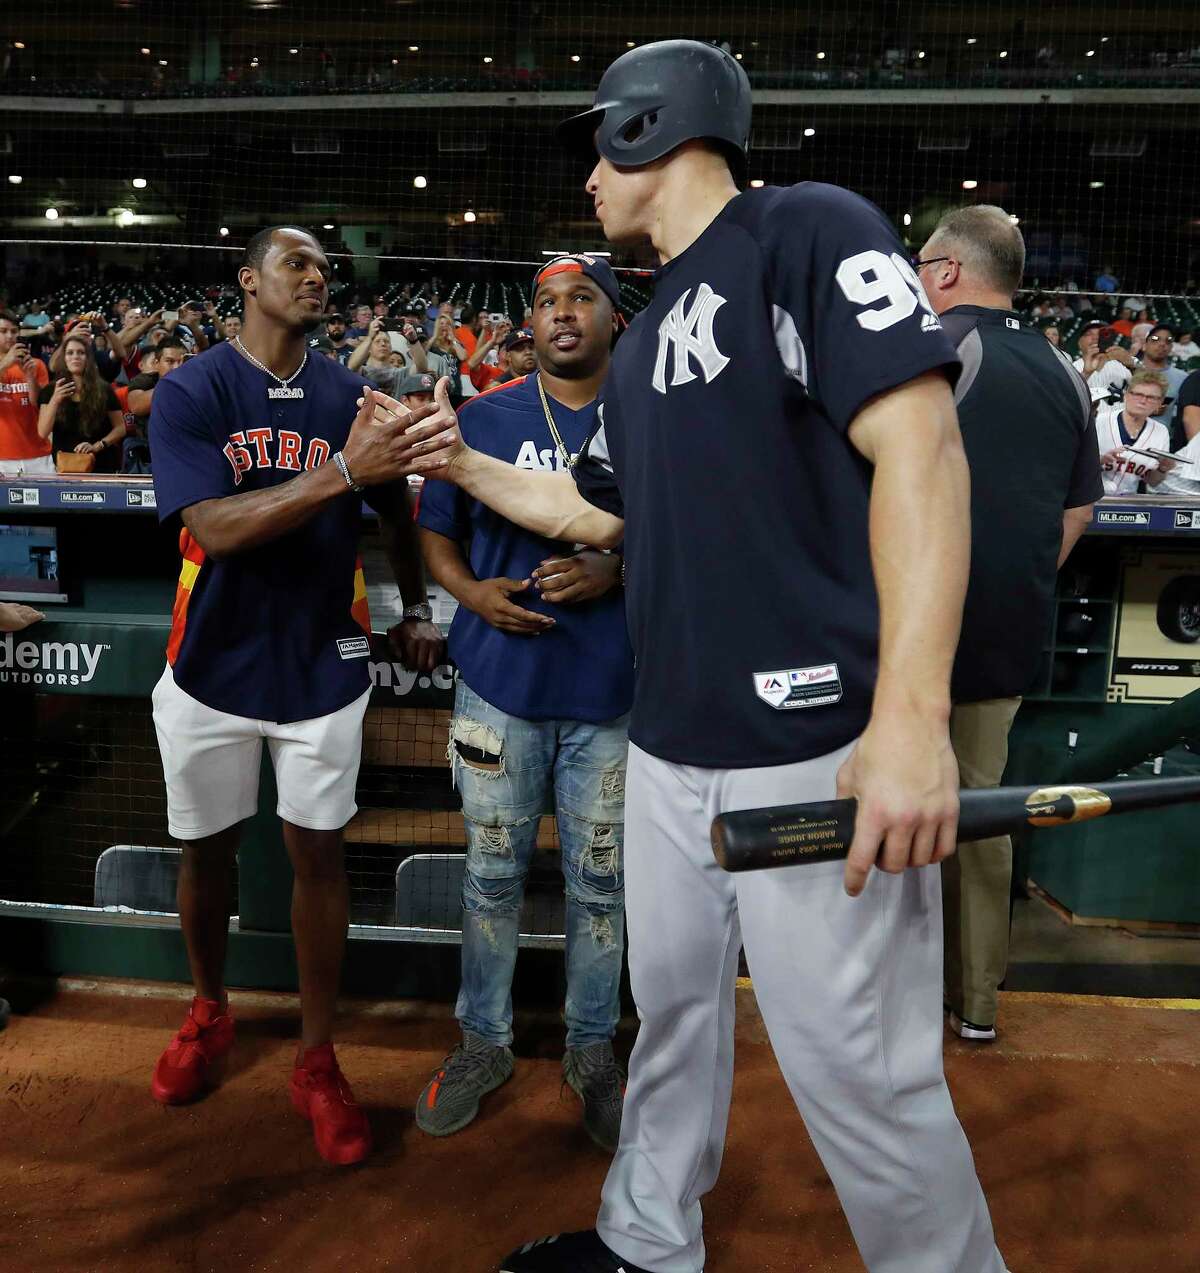 Houston Texans quarterback Deshaun Watson chats with New York Yankees Aaron Judge during batting practice before the start of an MLB game at Minute Maid Park, Tuesday, May 1, 2018, in Houston.